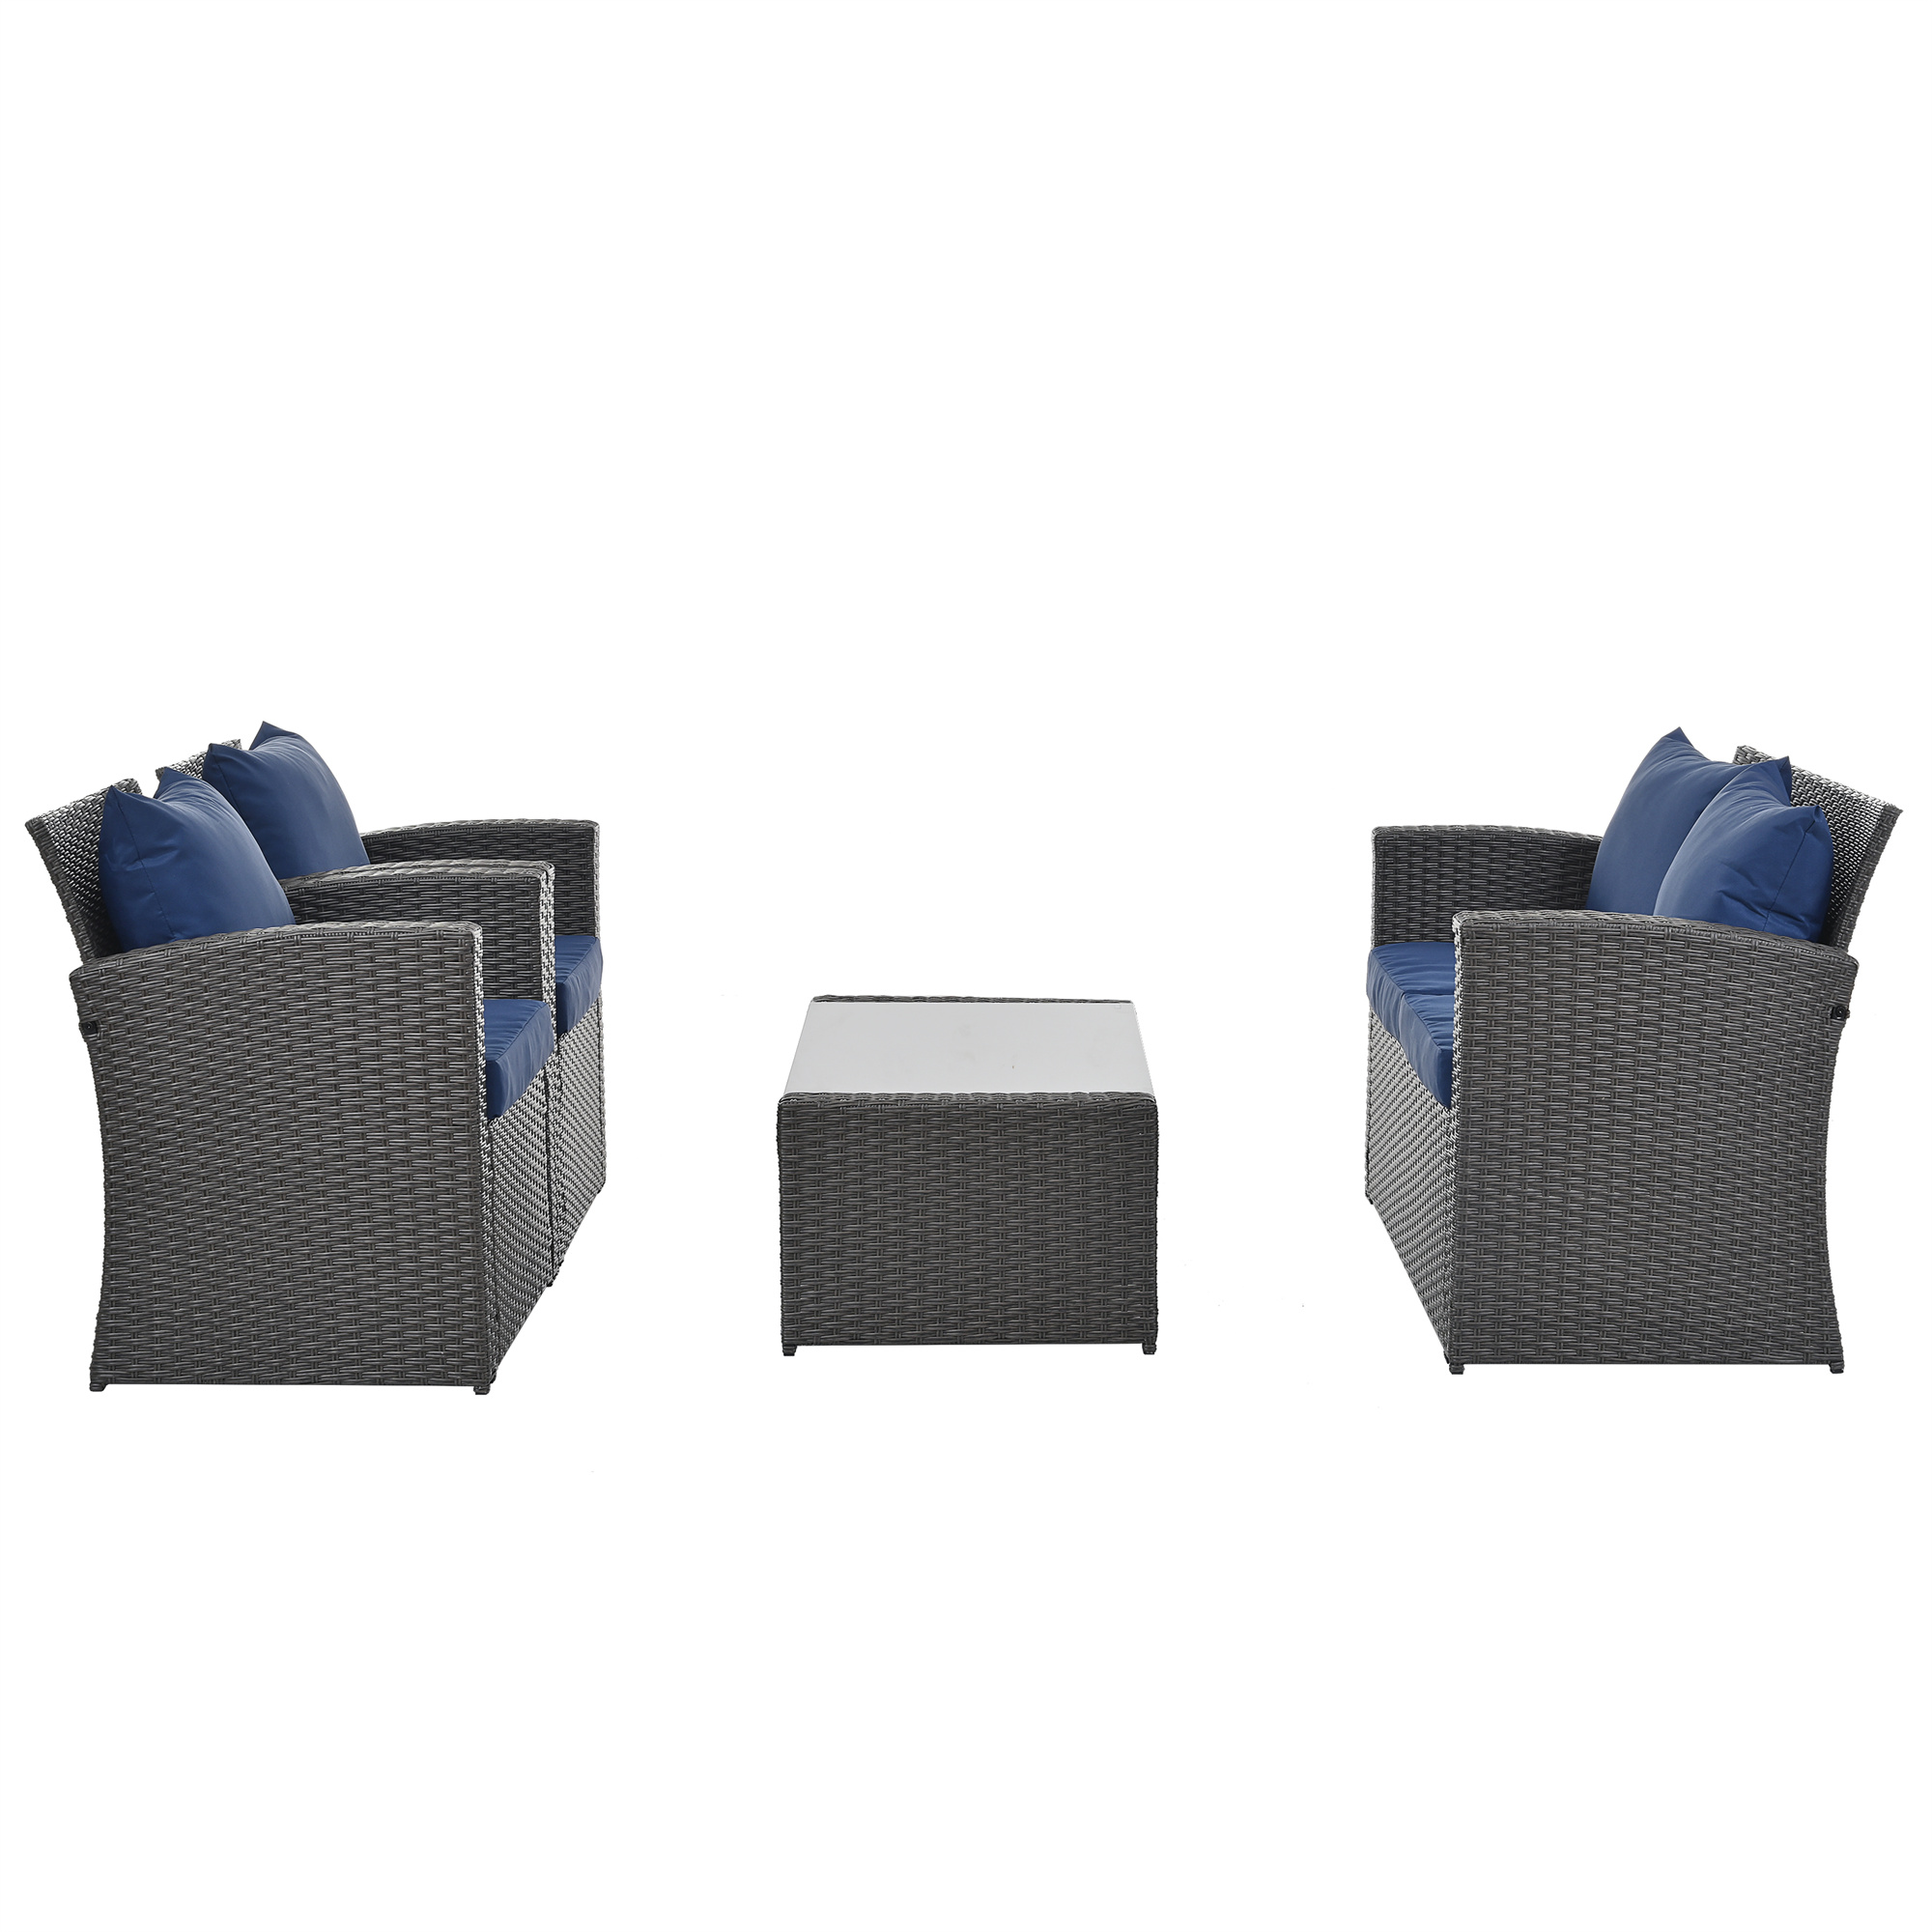 4 Piece Patio Furniture Set, Outdoor Conversation Set Acacia Solid Wood Outdoor Sofa Set for Poolside Garden, Grey Cushions - image 5 of 7